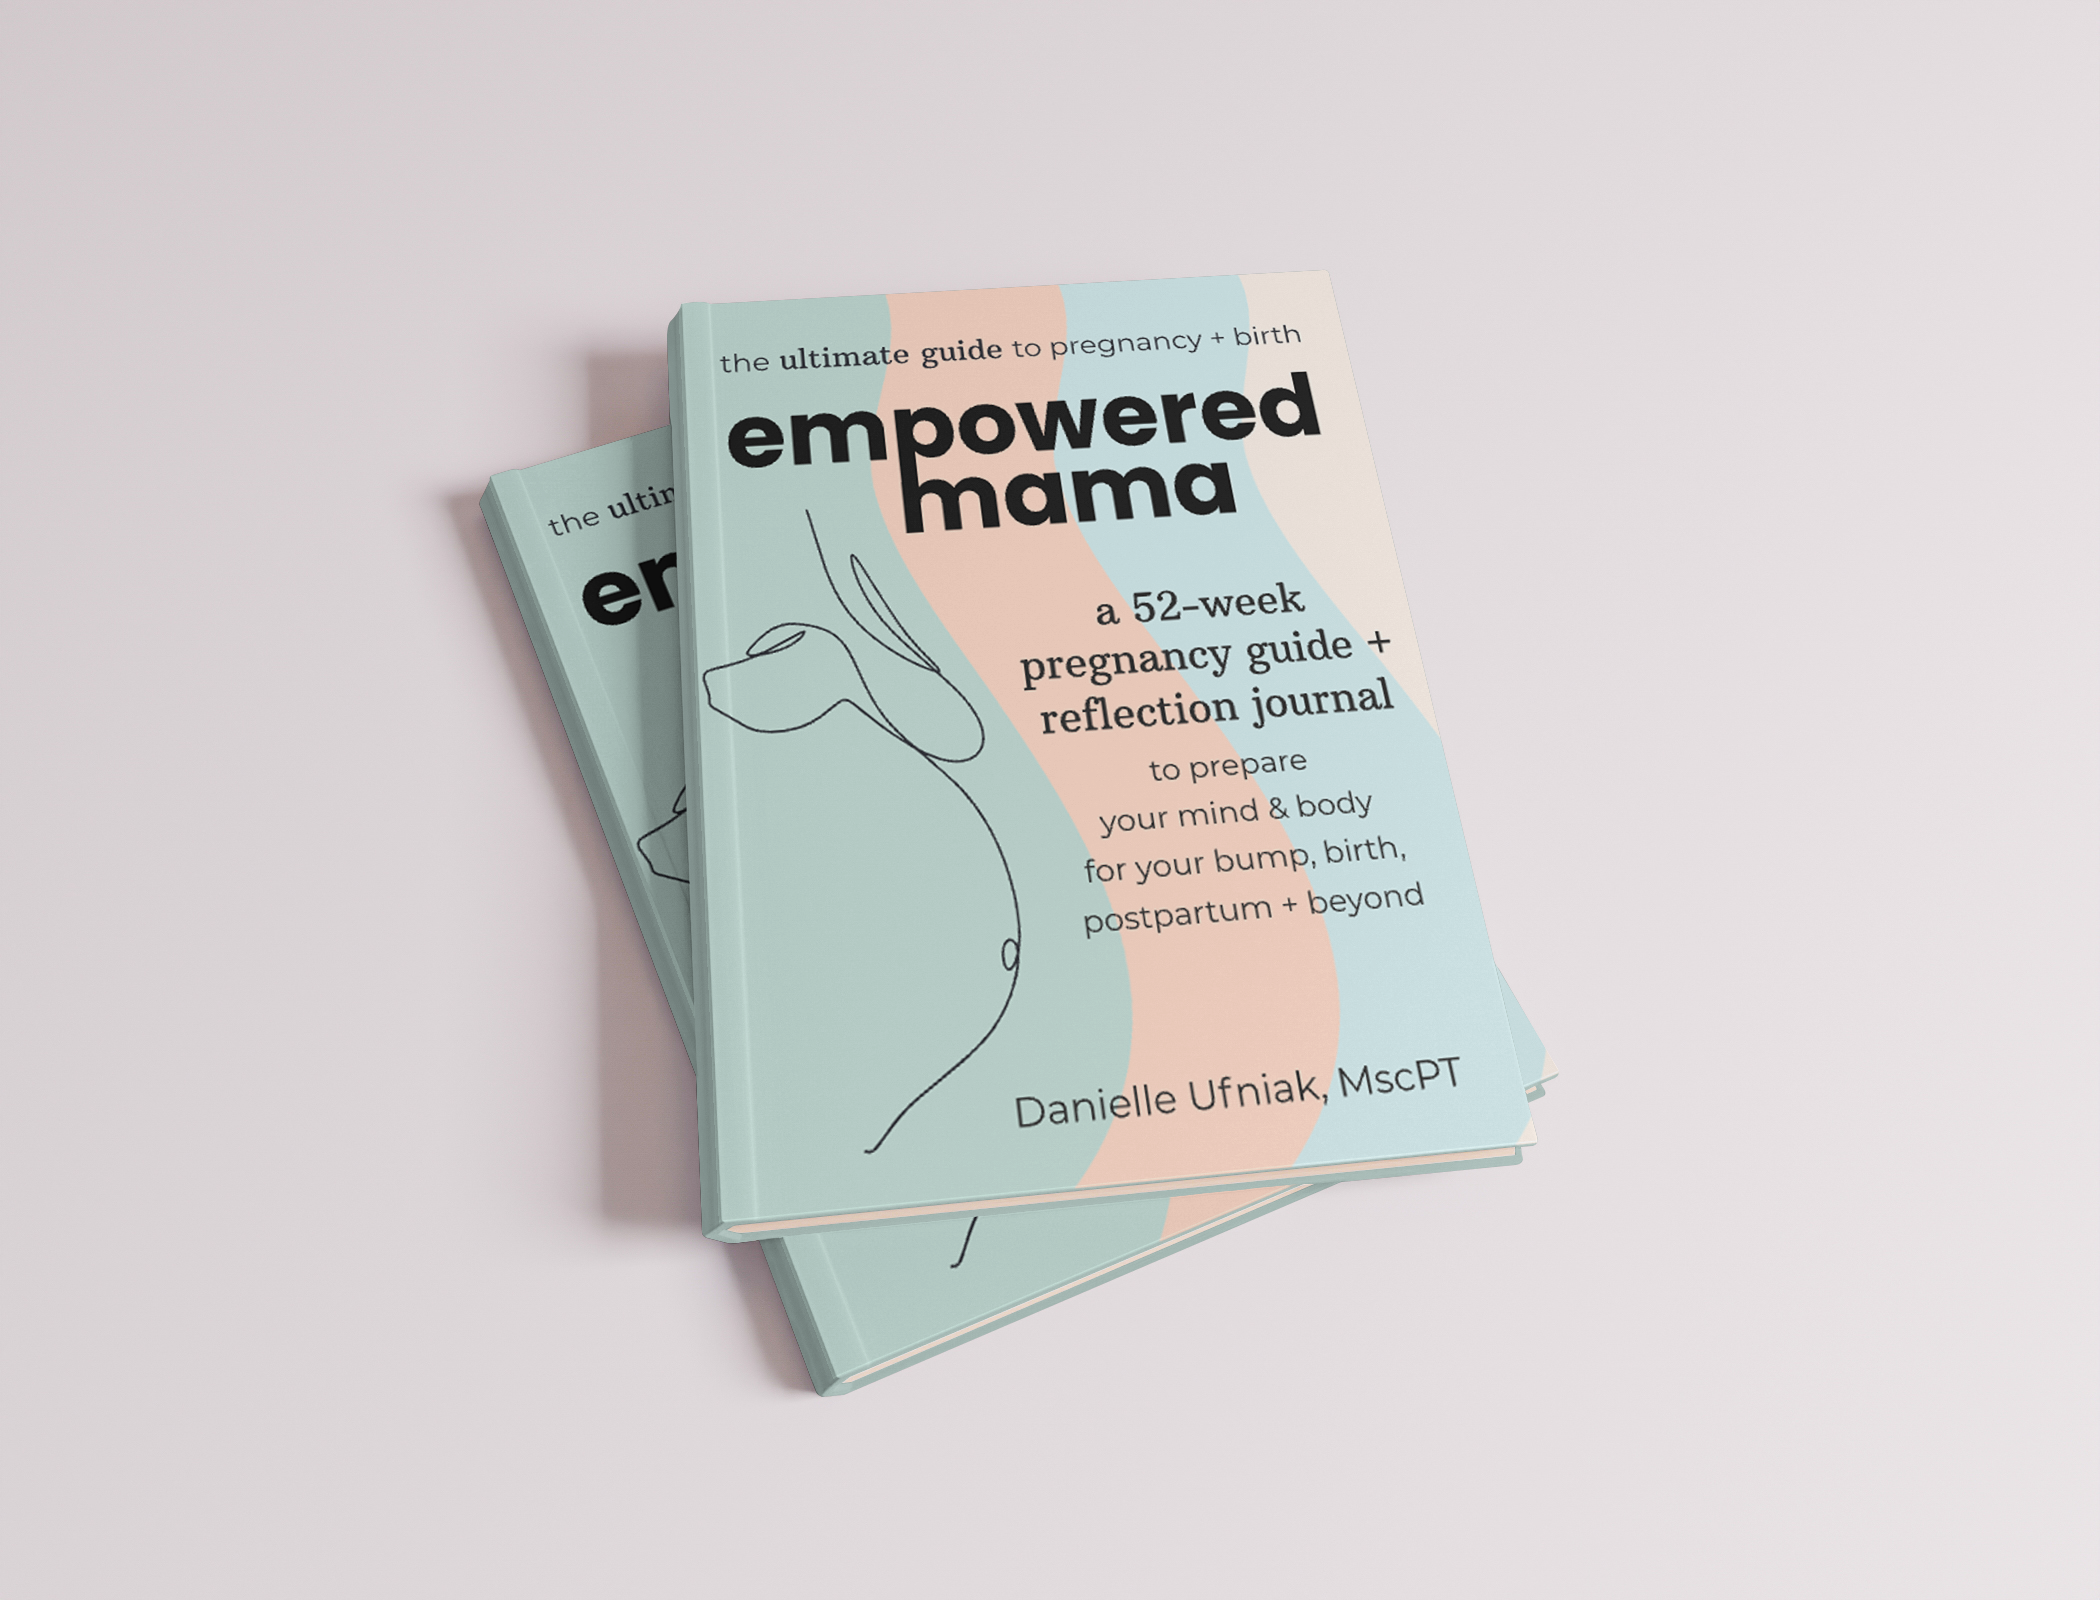 Empowered mama Book mock up photo.png (Copy) (Copy) (Copy)